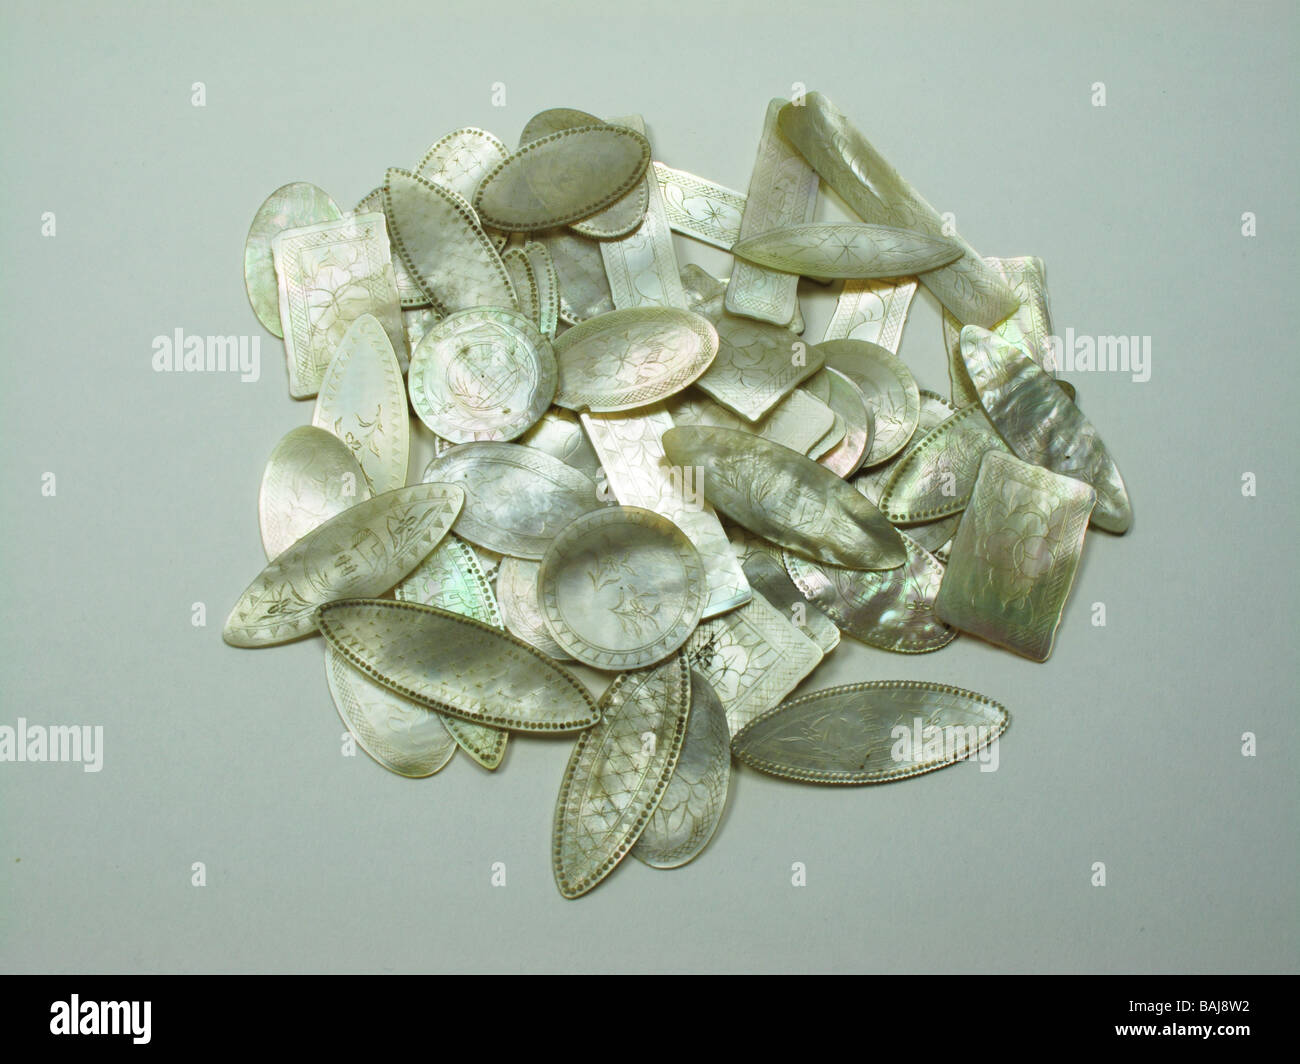 58 Antique Chinese mother of pearl gaming counters 18th century Stock Photo